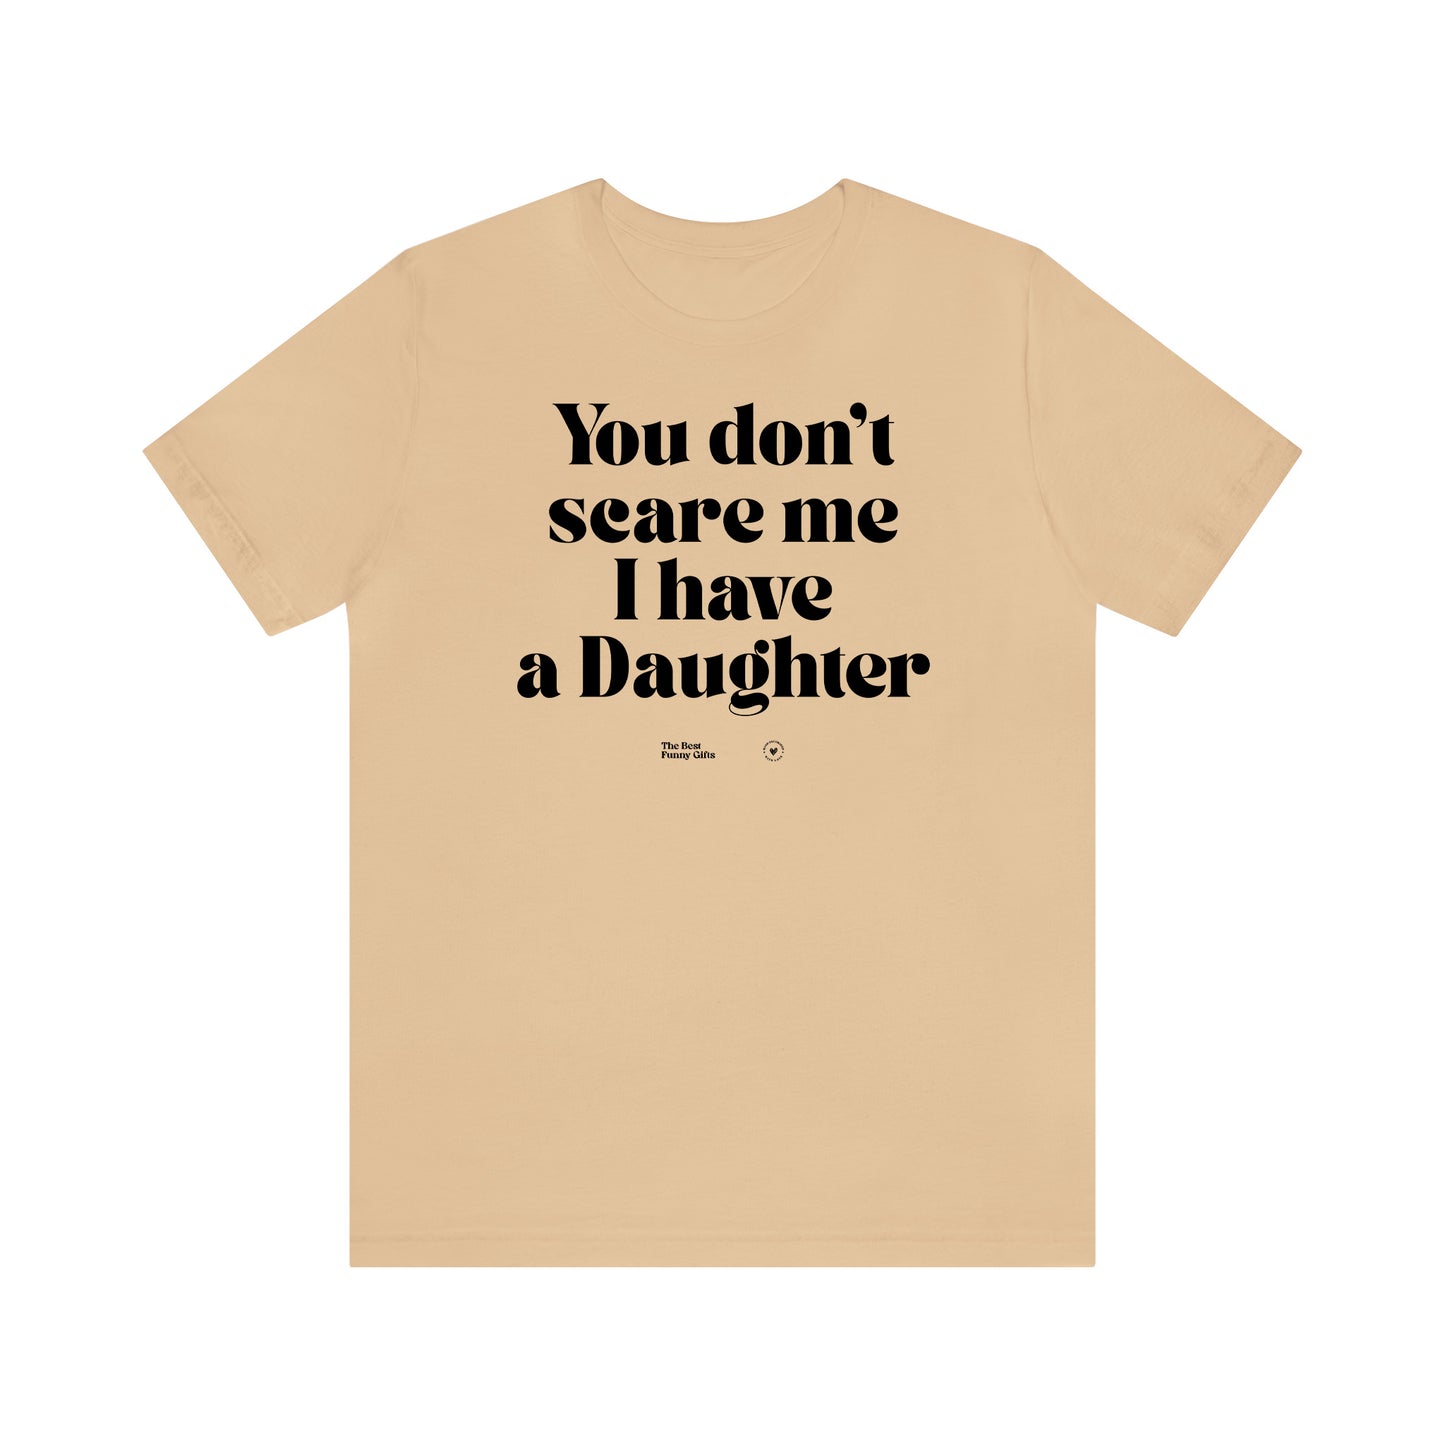 Funny Shirts for Women - You Don't Scare Me I Have a Daughter - Women’s T Shirts